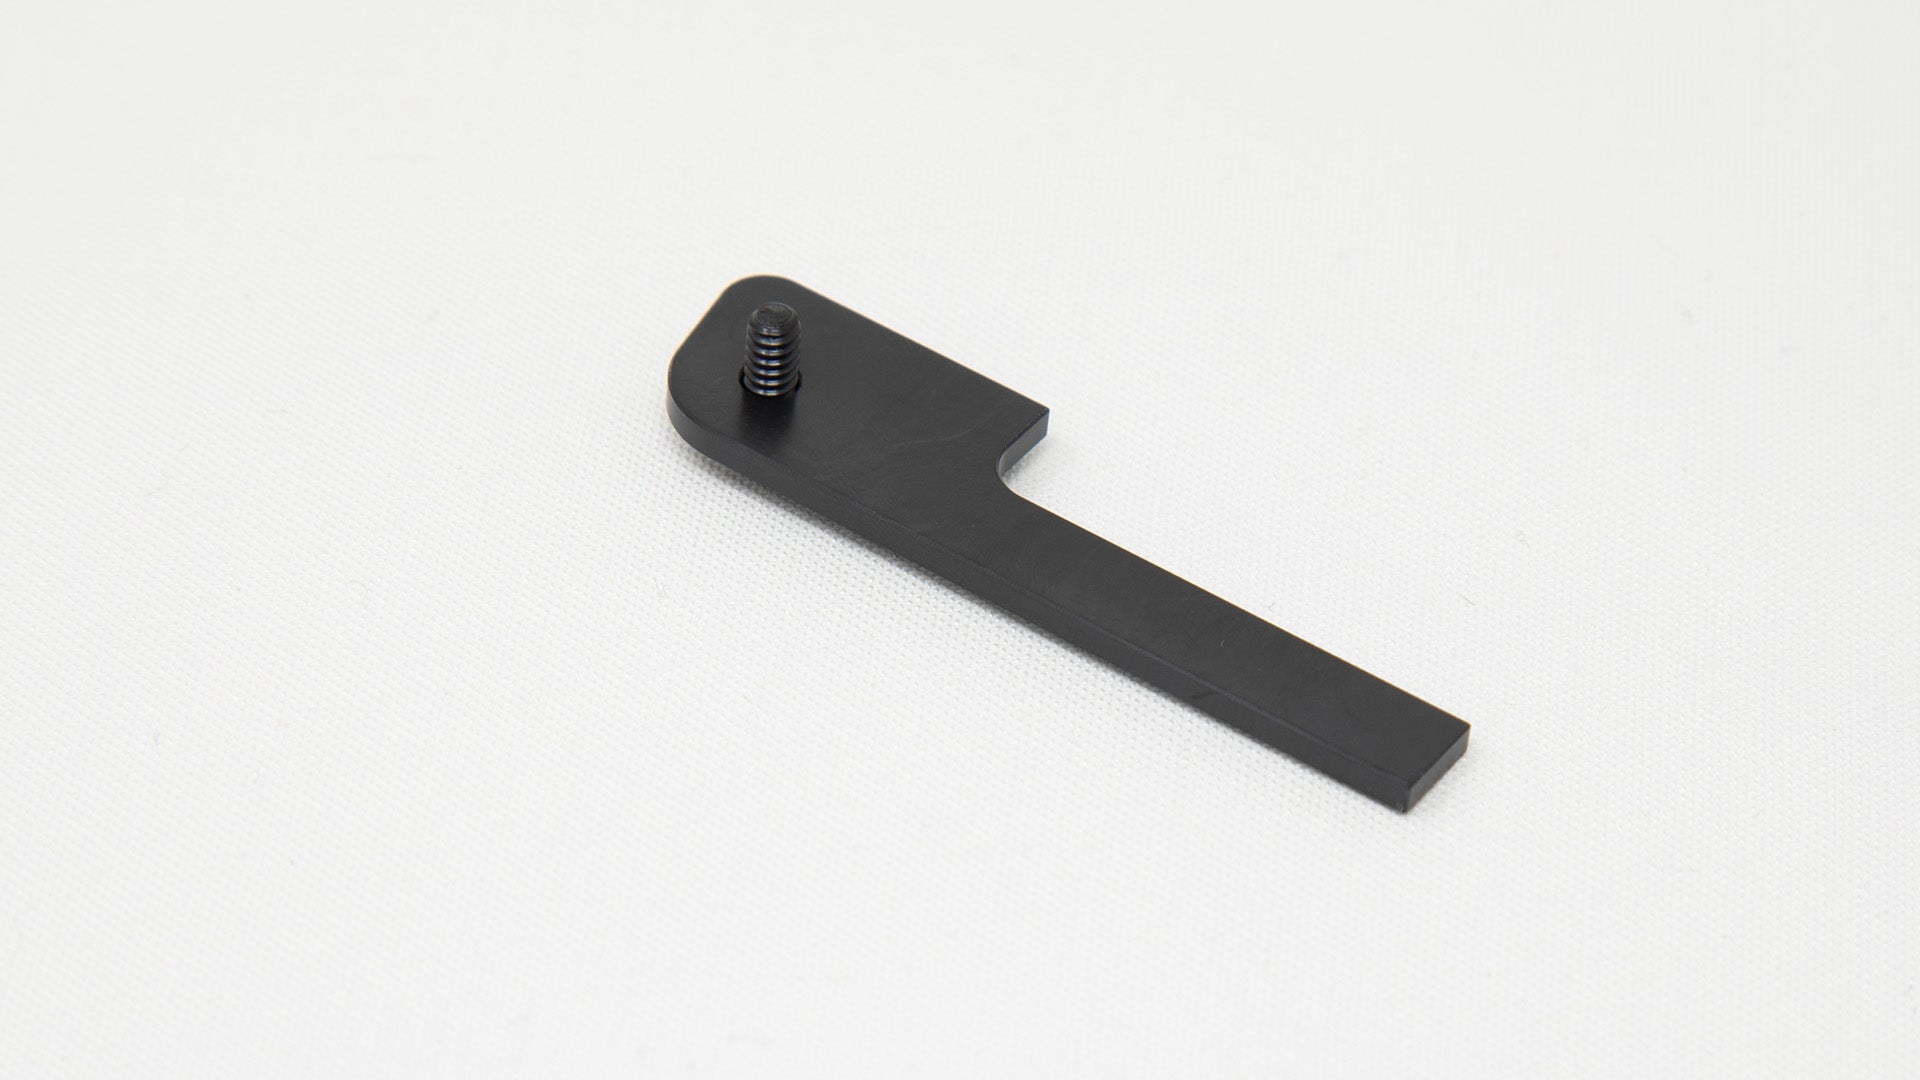 P-shaped plastic piece with screw